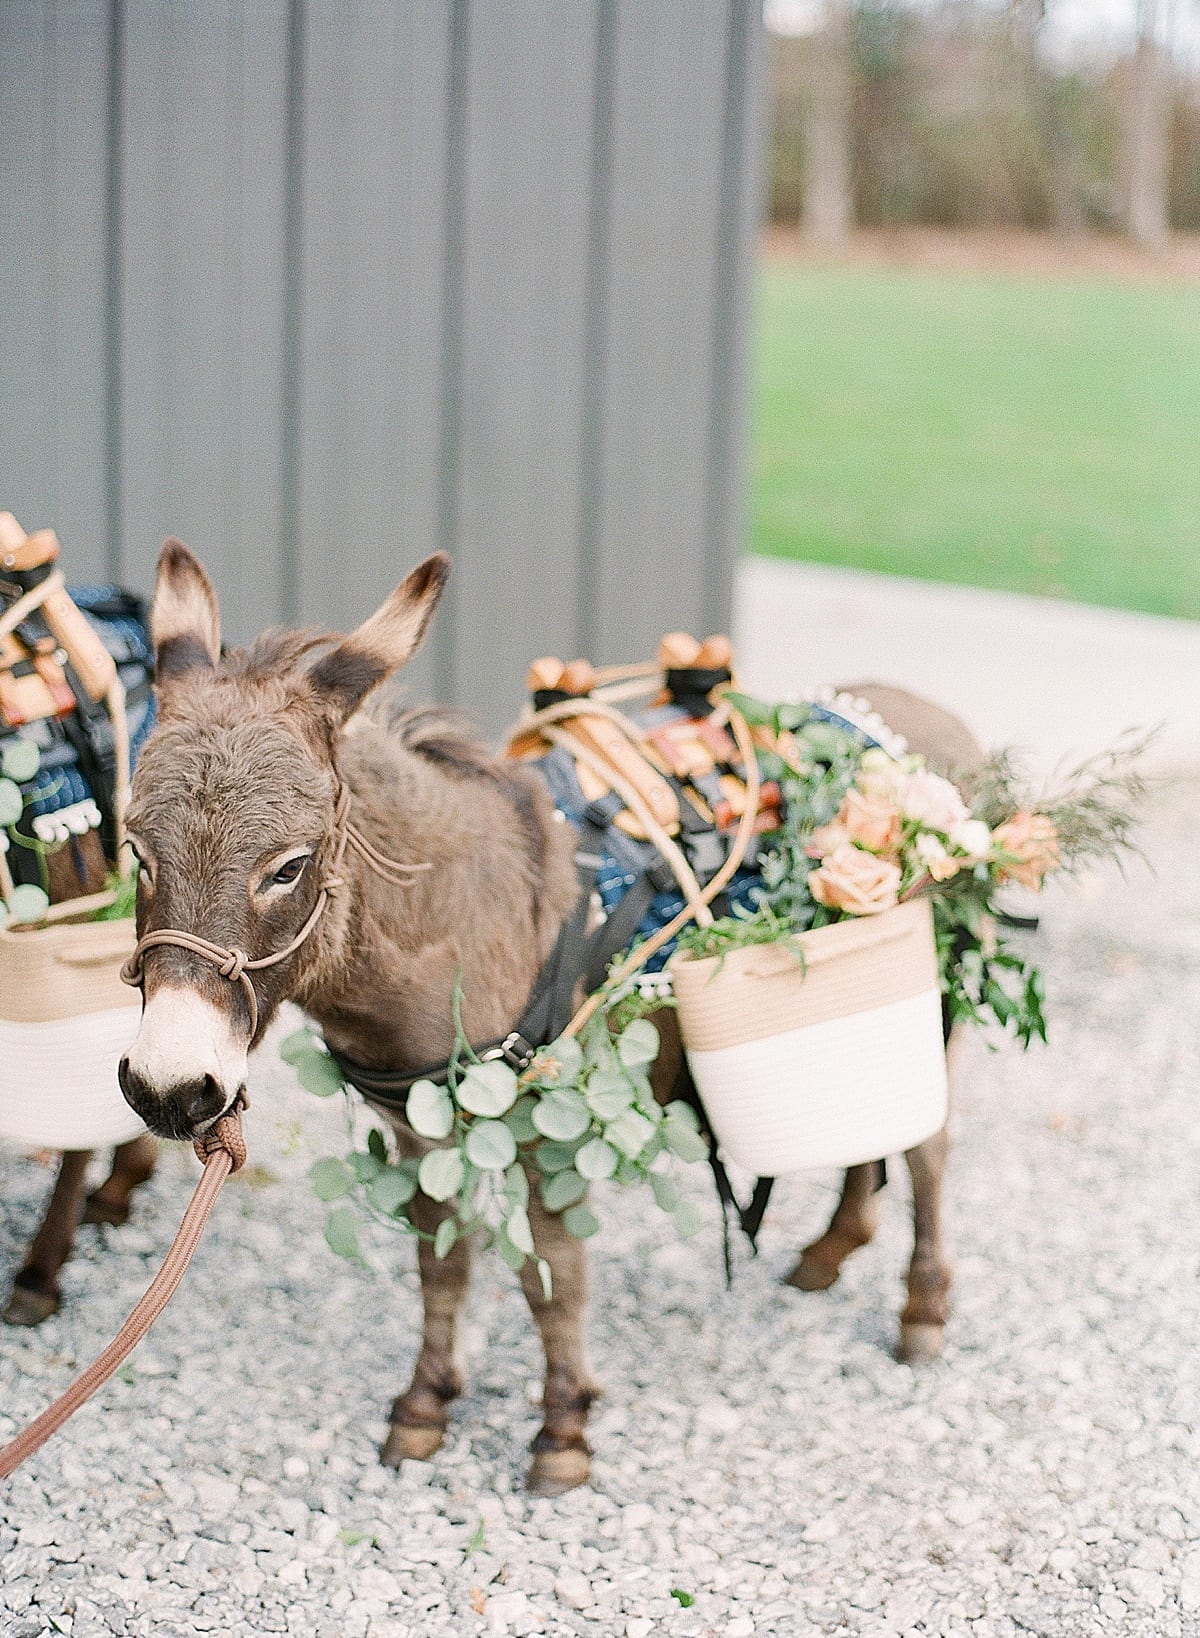 Donkey with Baskets of Flowers on Their Backs Greeting Guests at Bridal Shower Photo